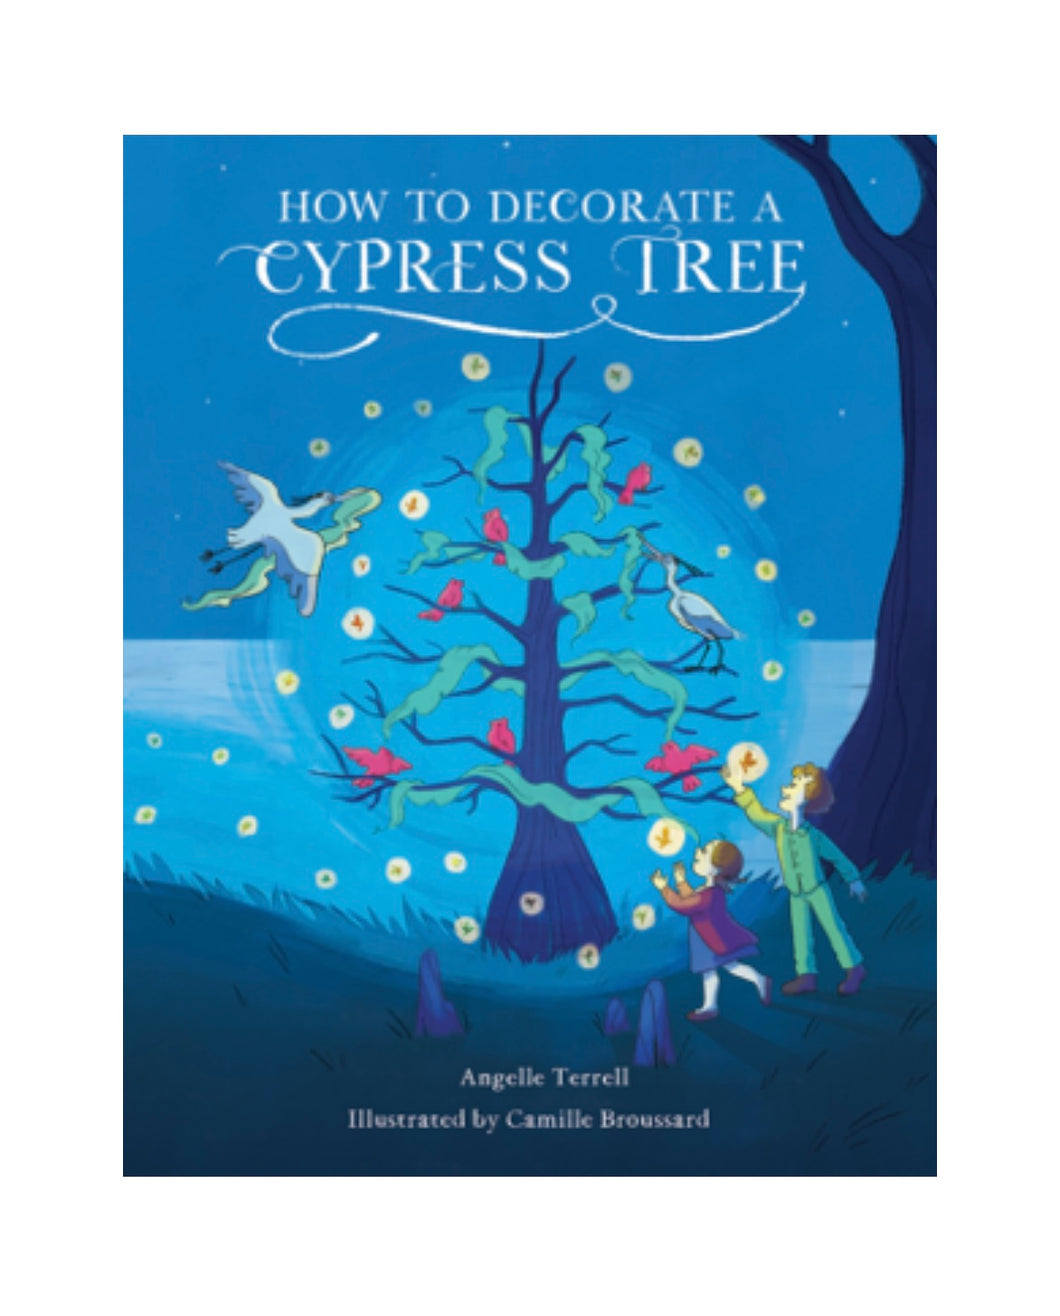 How to Decorate a Cypress Tree